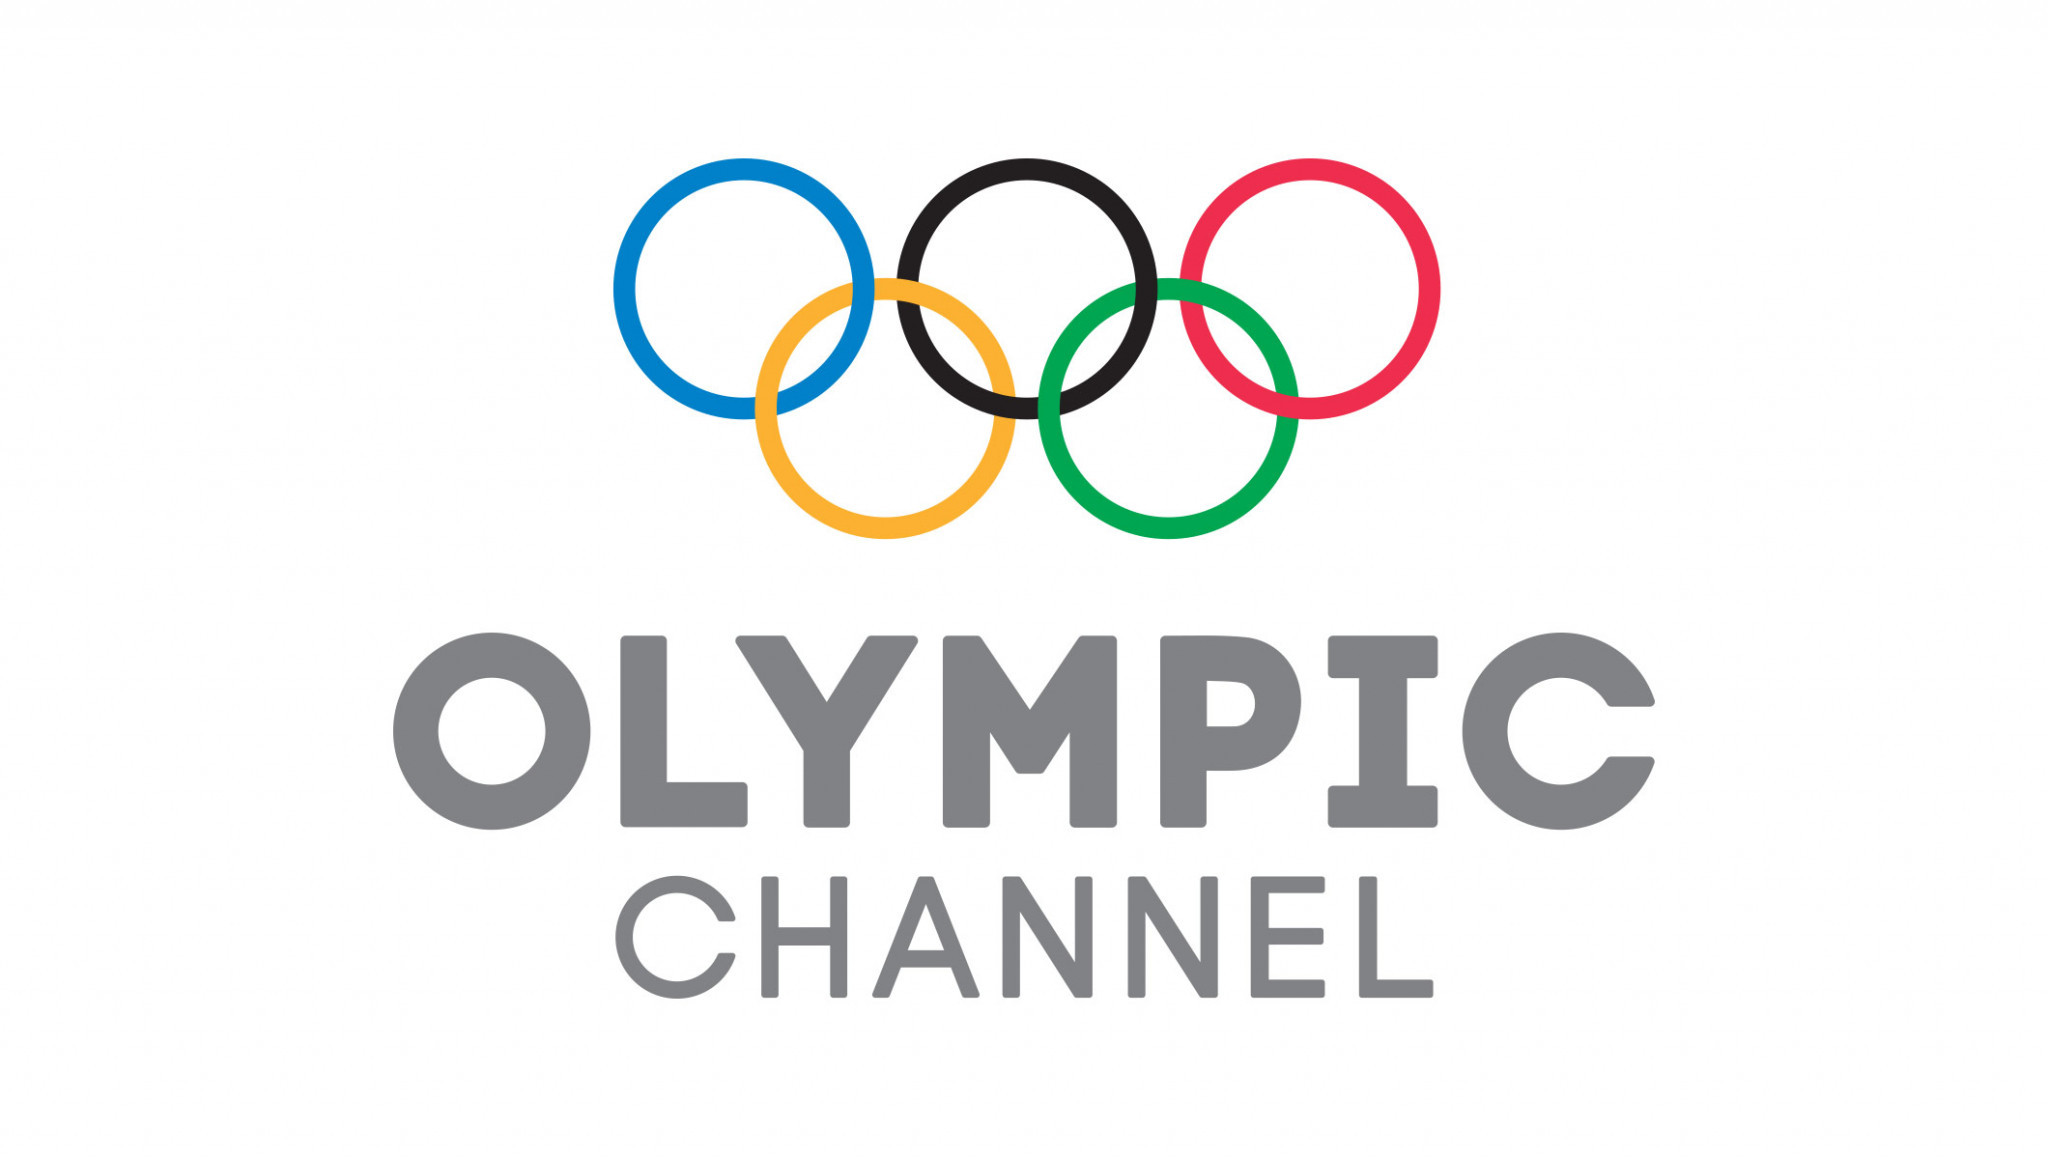 Kickboxing, sambo and squash latest sports to sign up with Olympic Channel